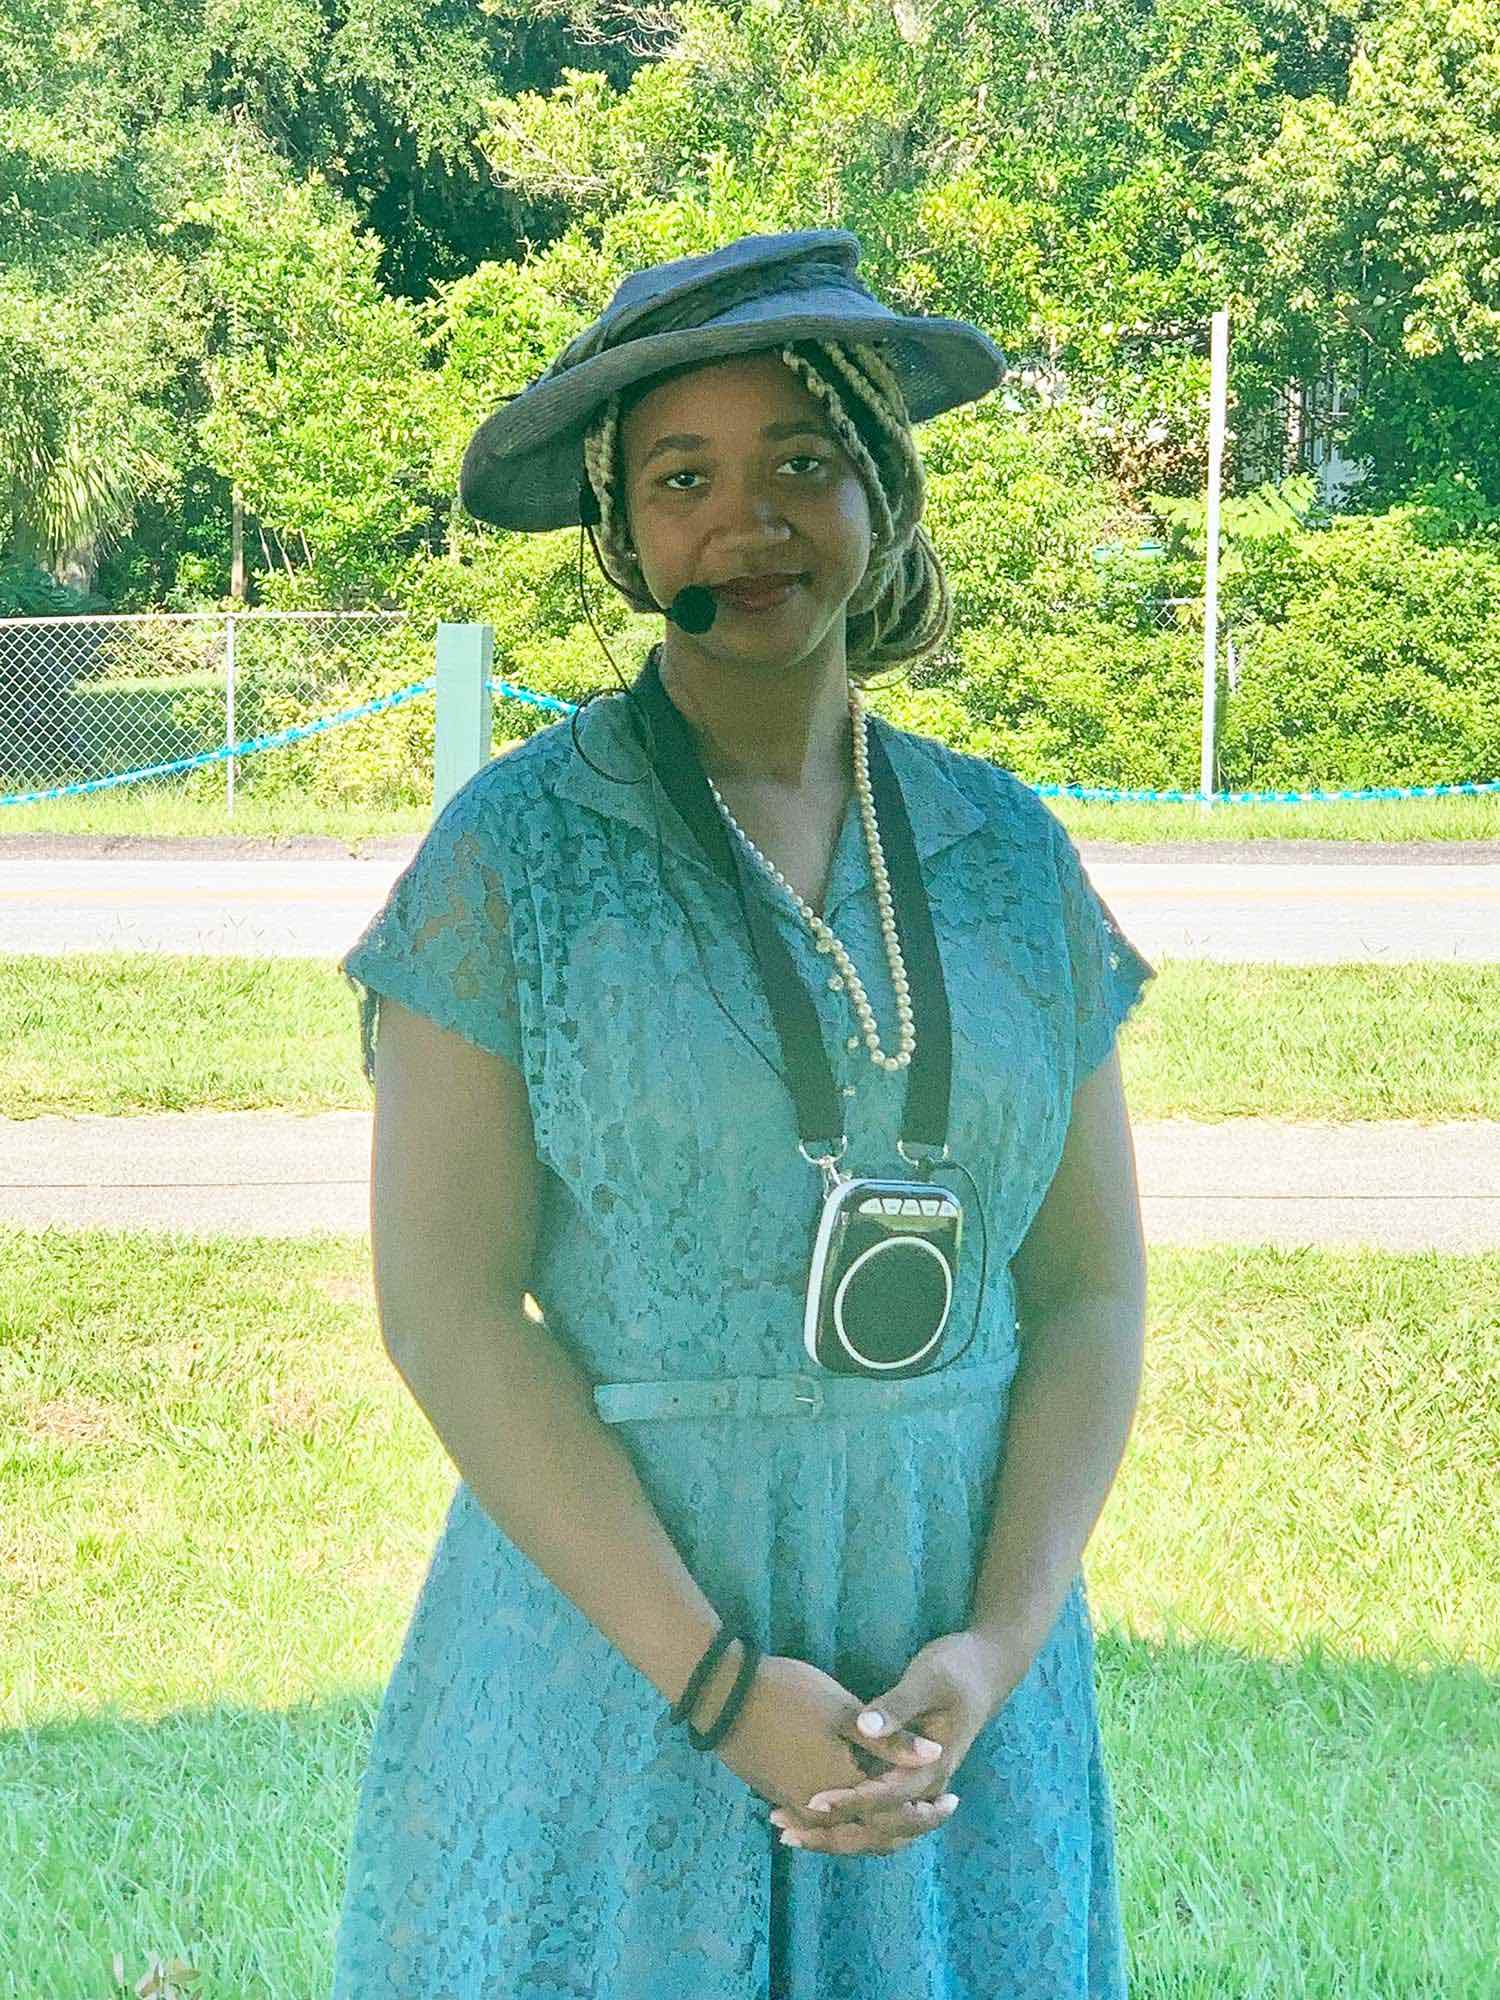 Stetson student is dressed in period costume as Edith Starke